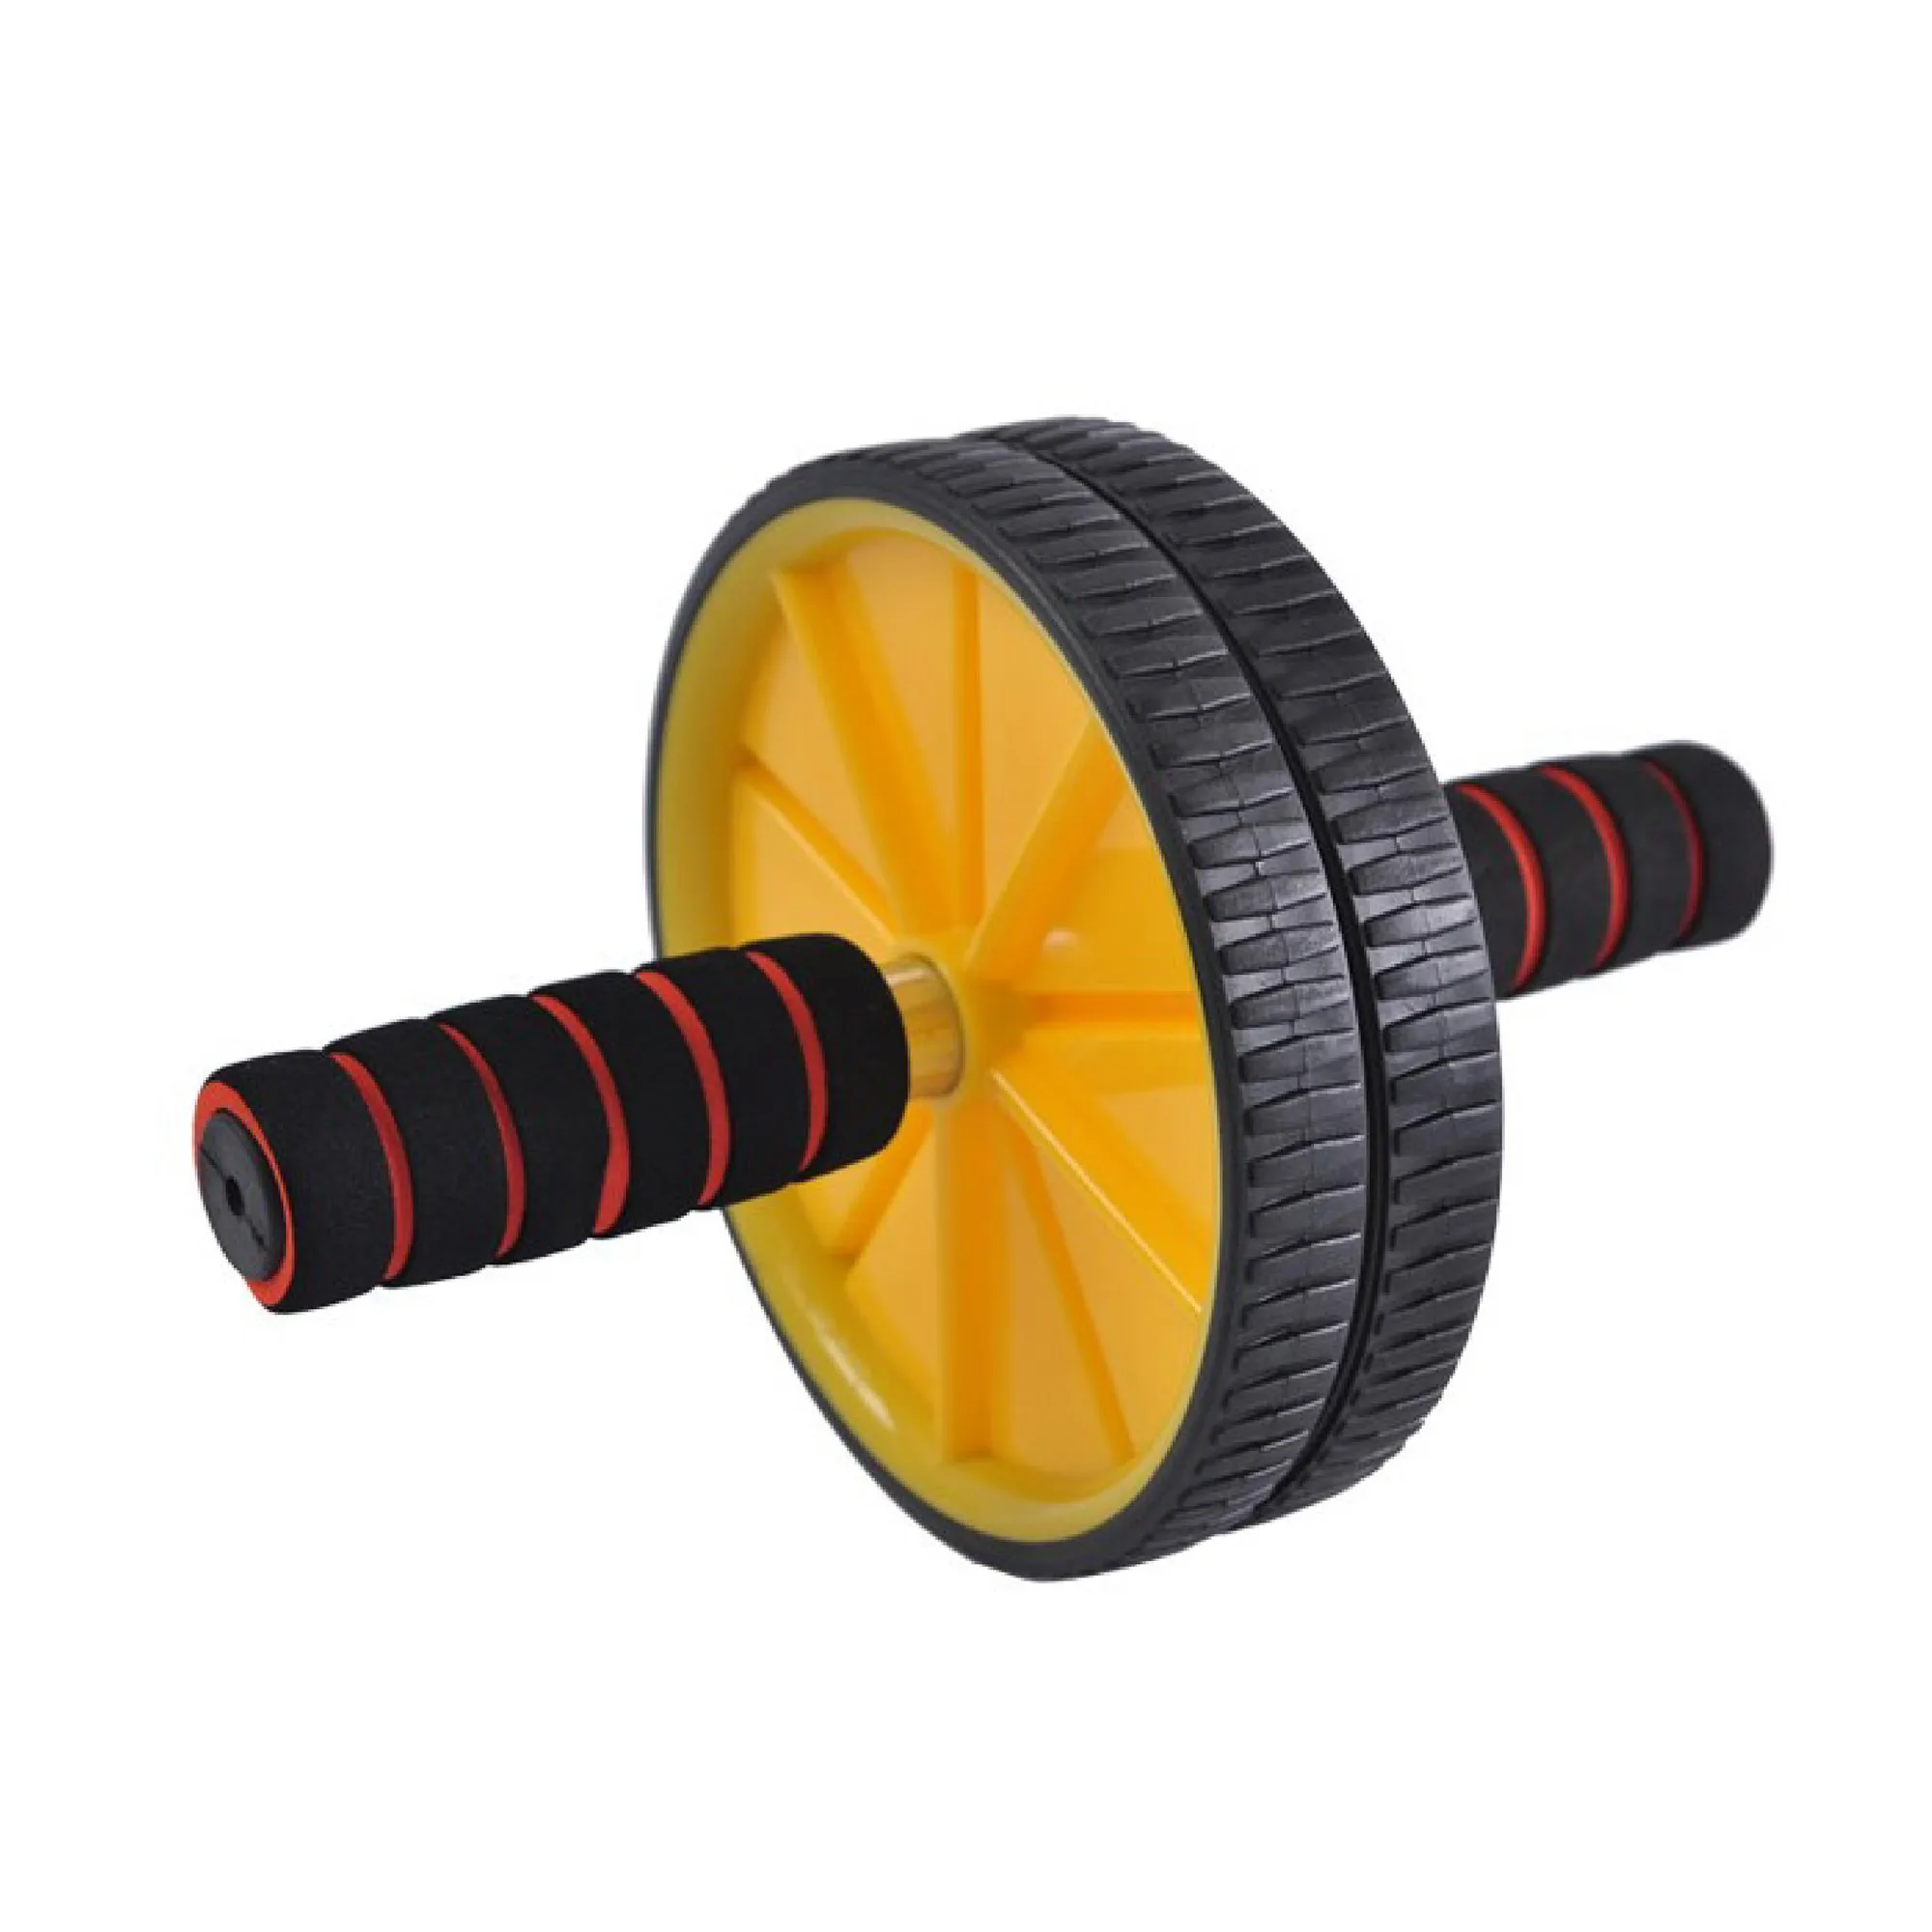 
Fitness Exercise Multifunctional Muscle Trainer Push-up Abdominal Wheel 